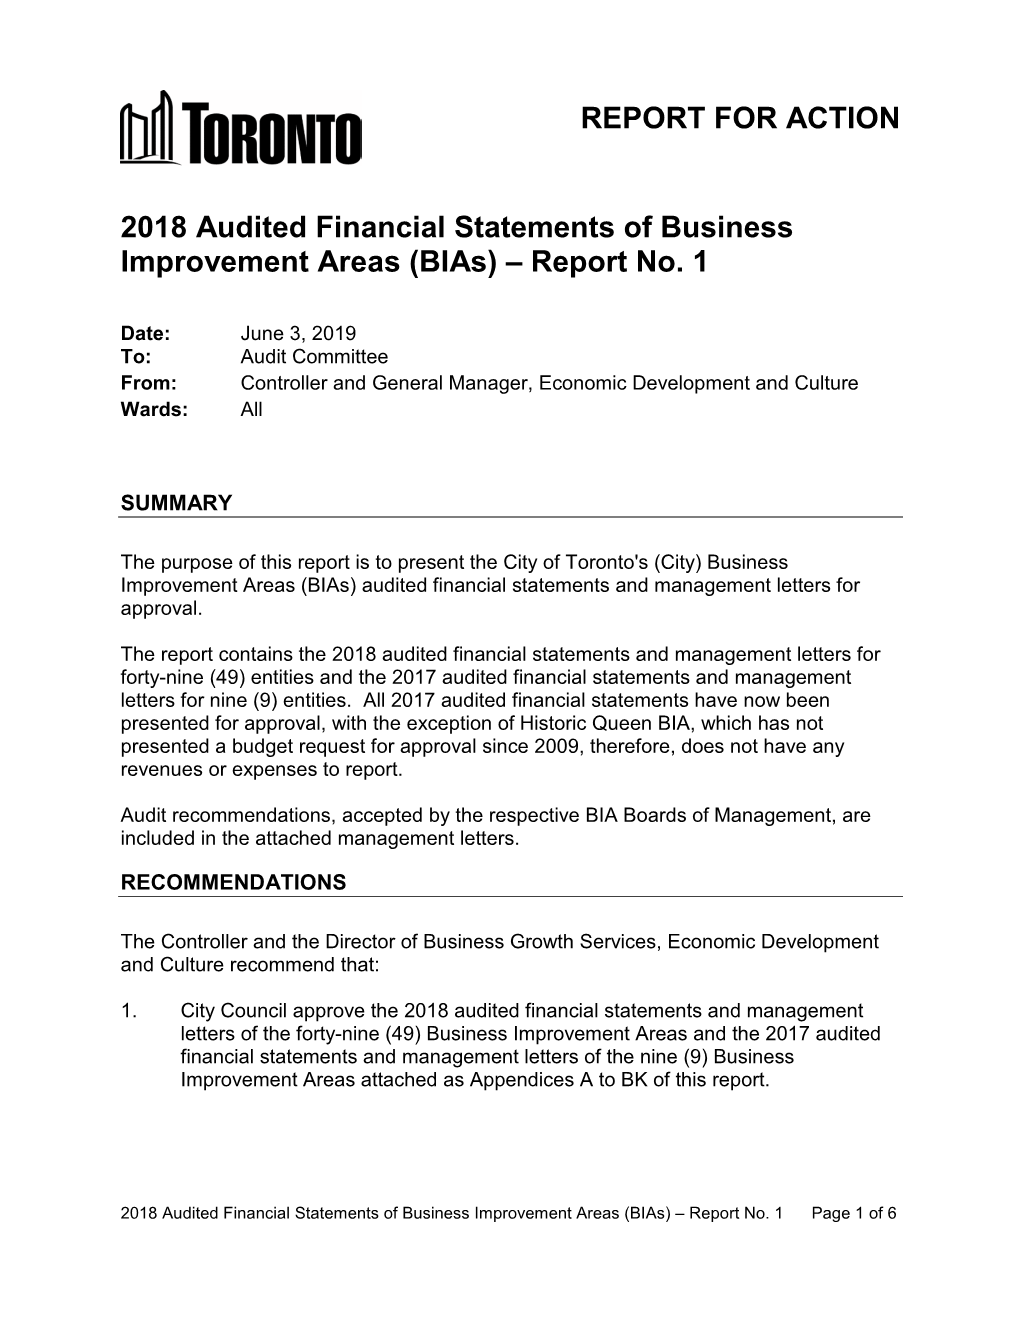 2018 Audited Financial Statements of Business Improvement Areas (Bias) – Report No. 1